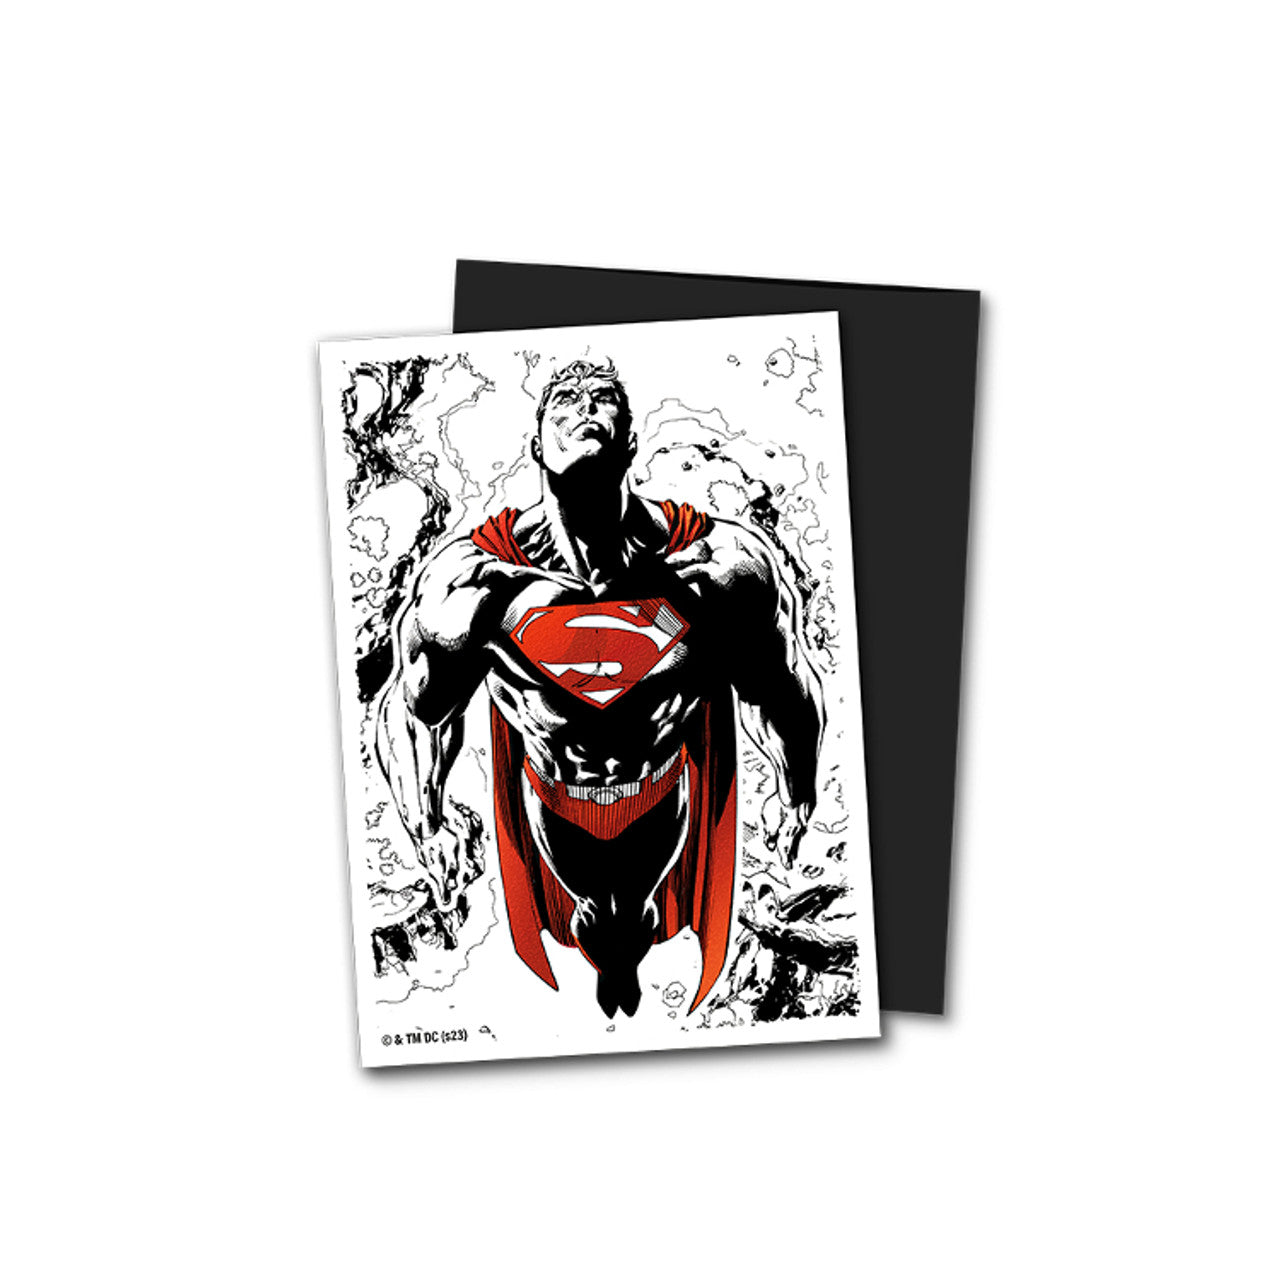 Dragon Shield Dual Matte Art Sleeves "Superman Core (Red/White Variant)" Standard Size 100pcs-Dragon Shield-Ace Cards & Collectibles